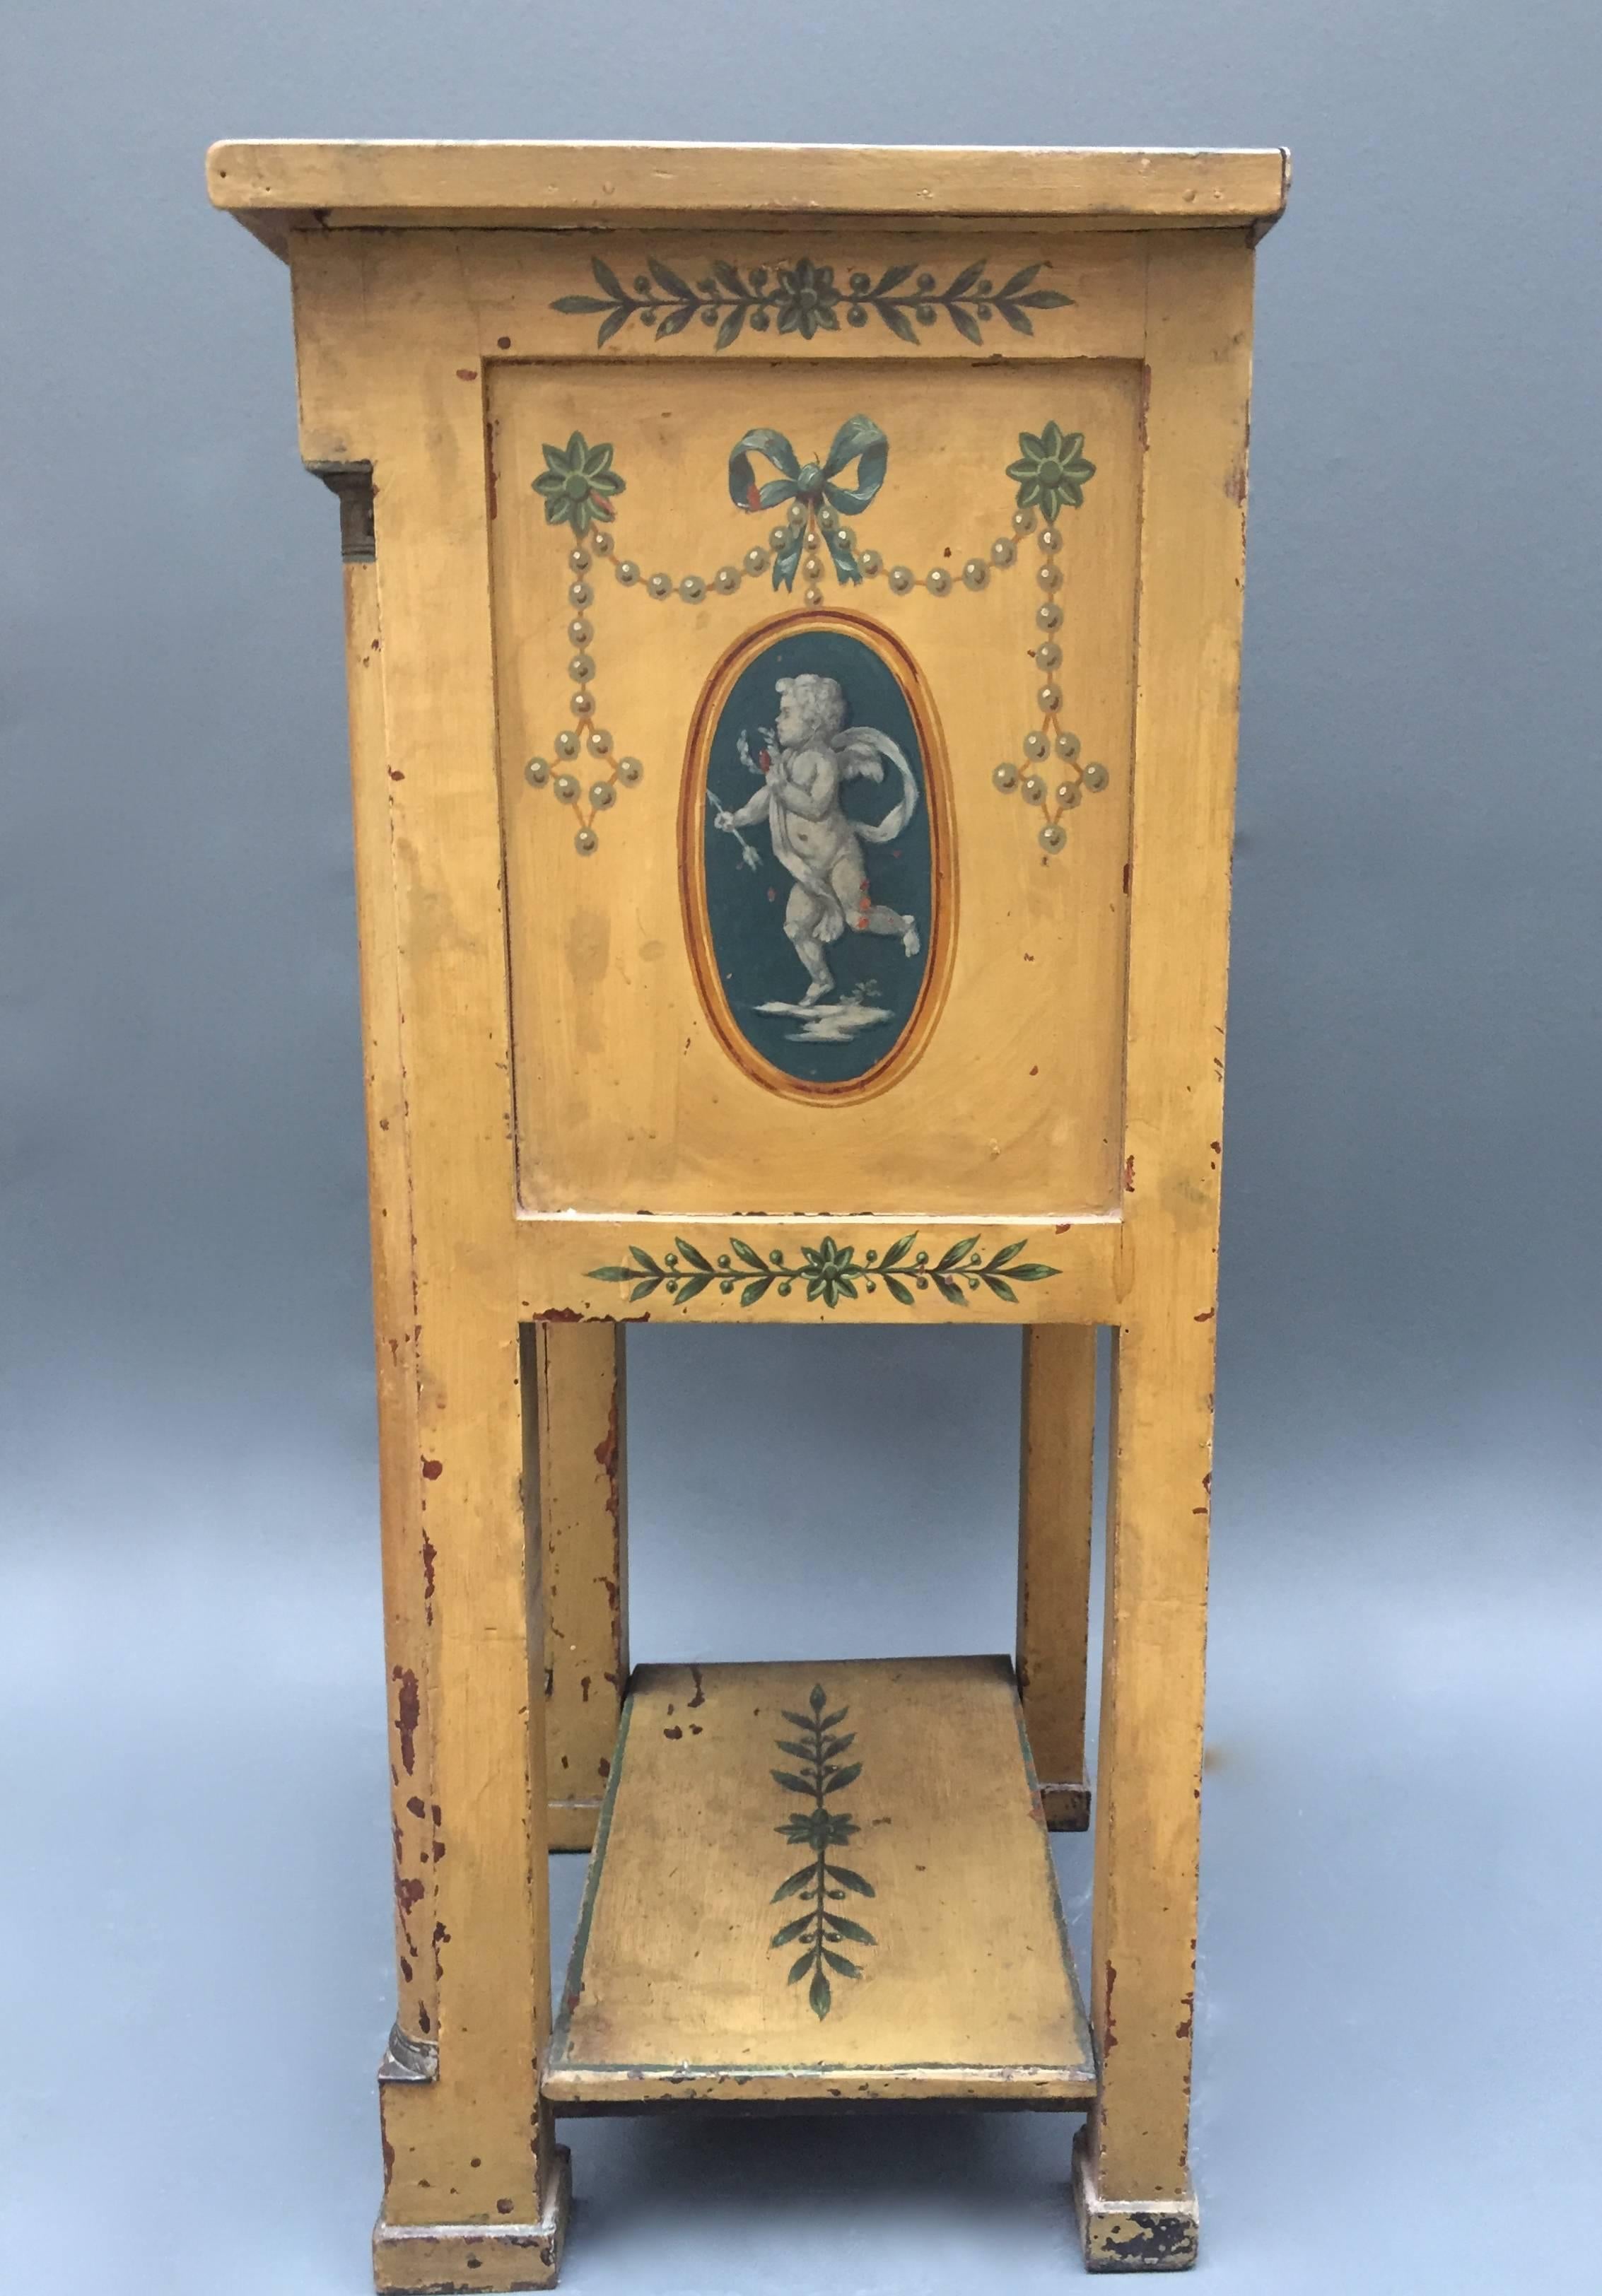 19th Century Austrian Side Table with Three-Drawers and Paintings of Angels (Österreichisch)